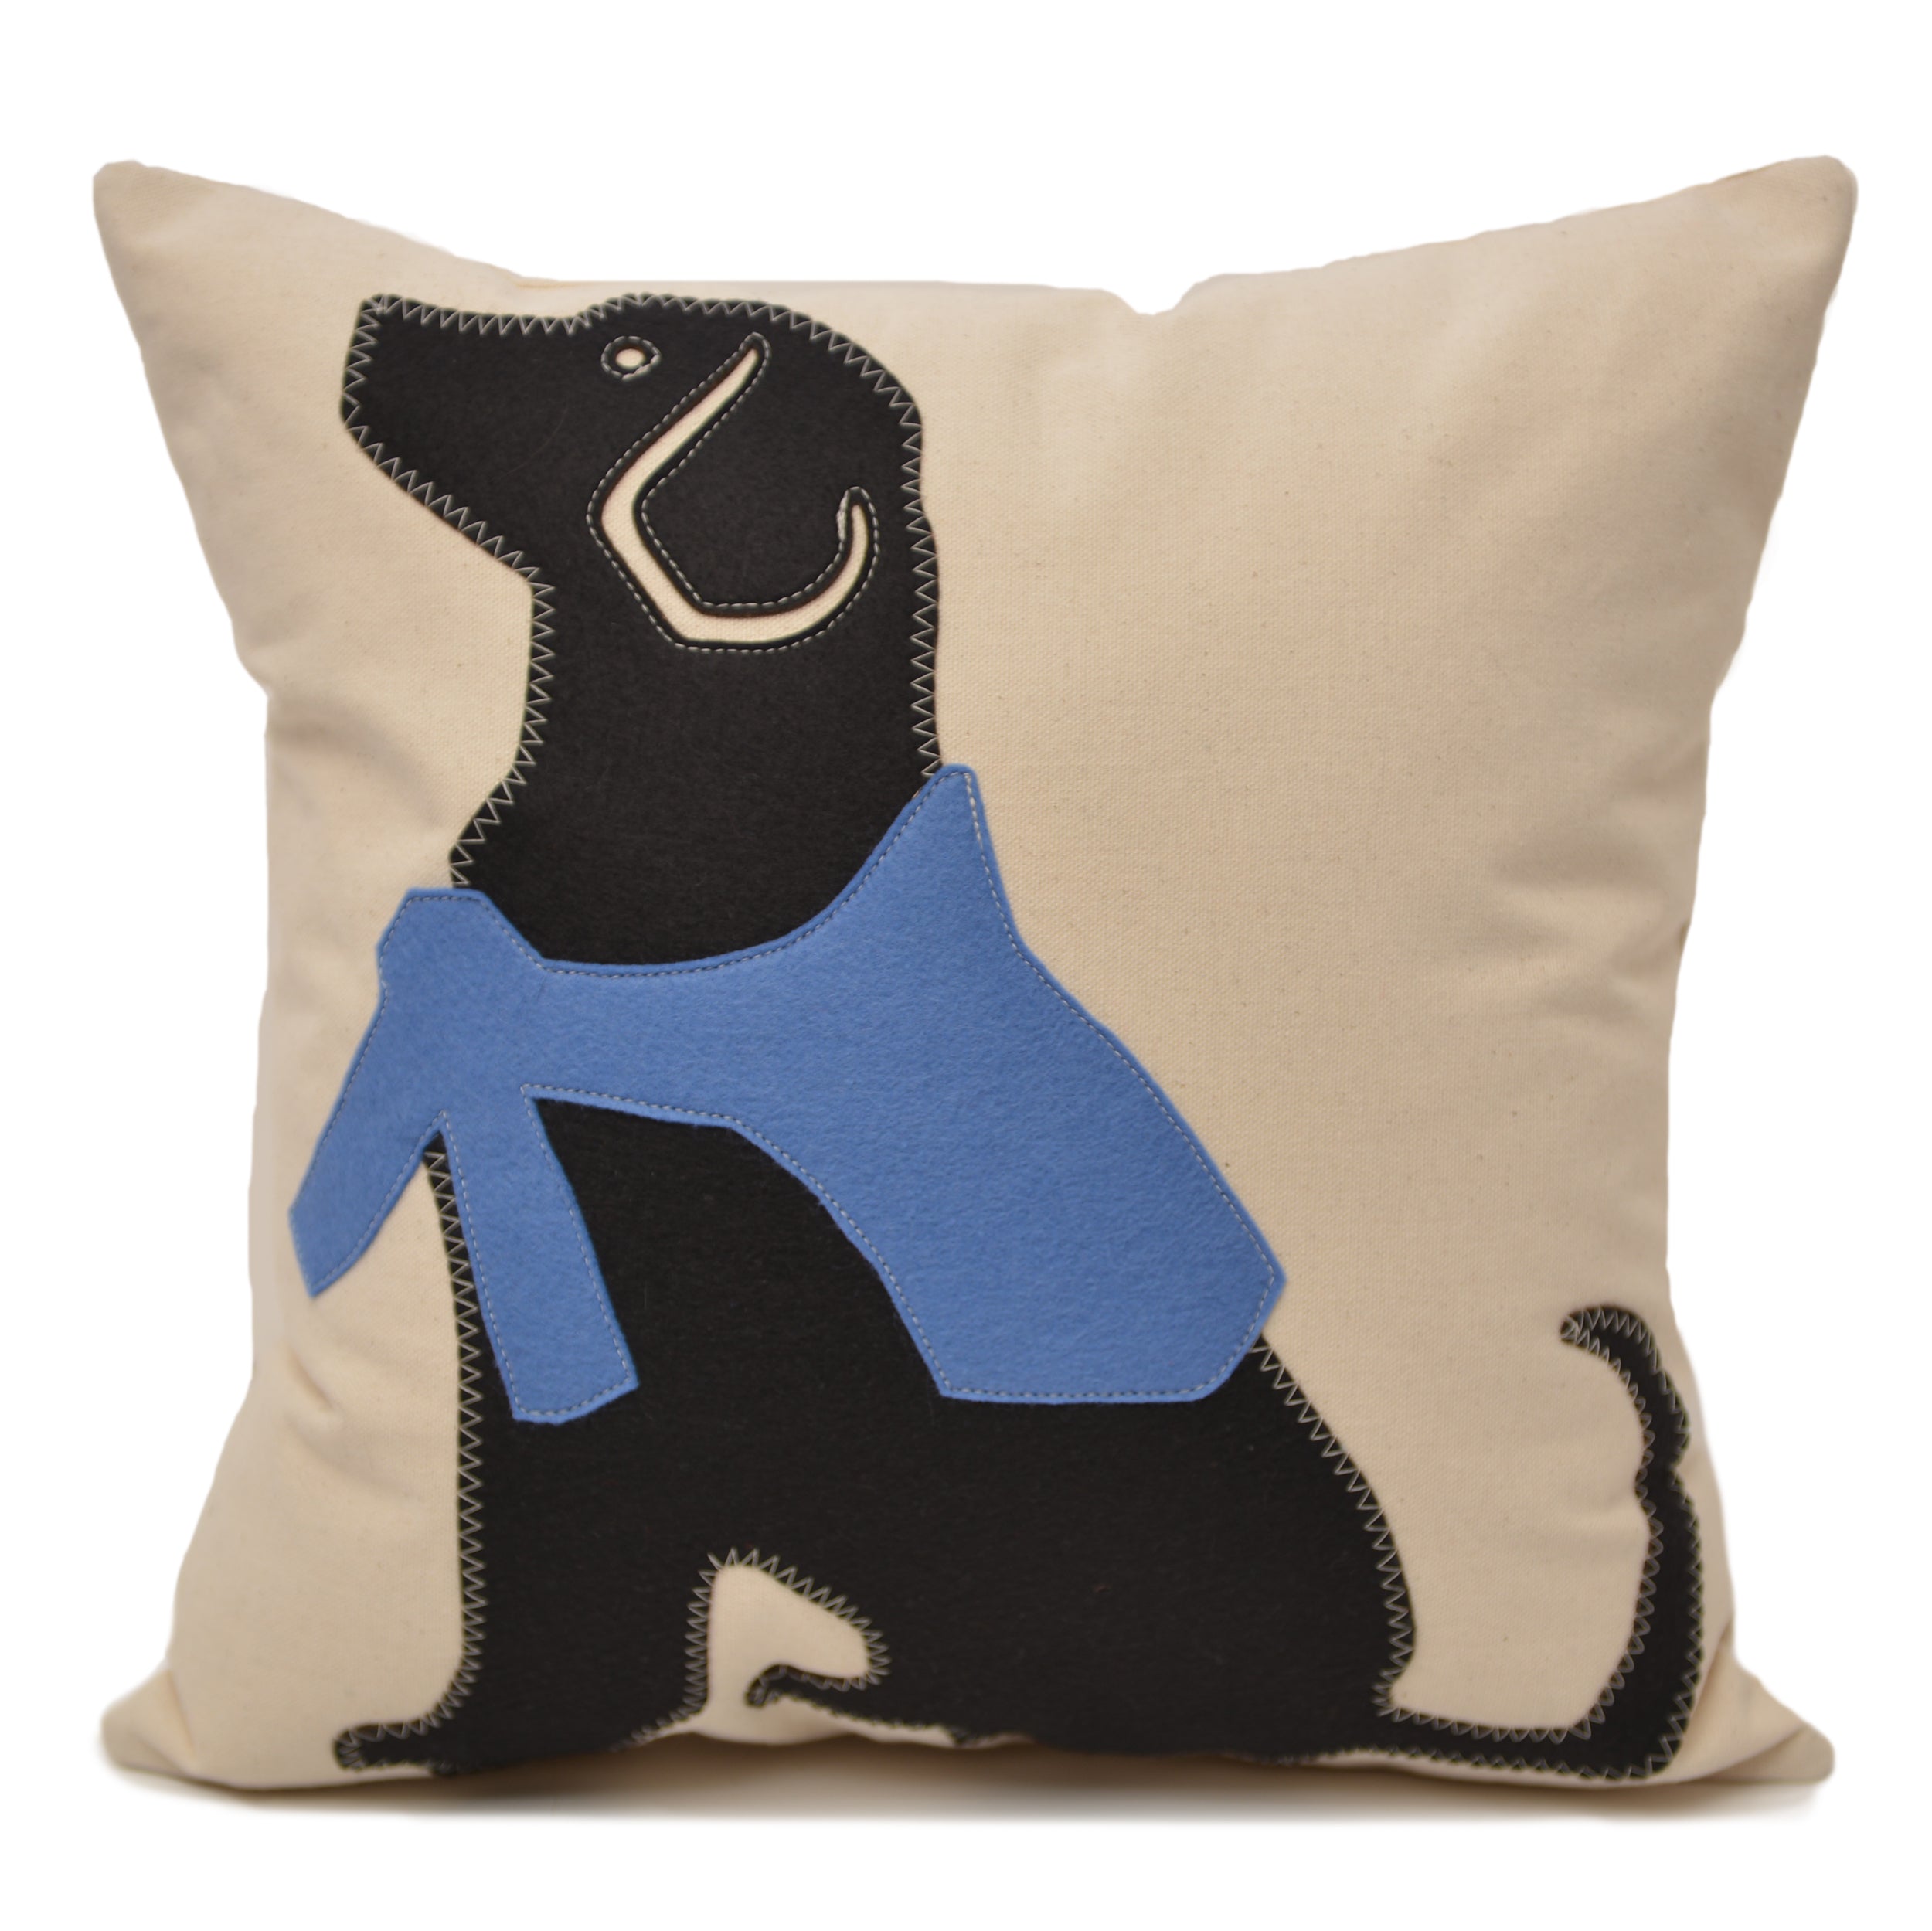 18x18" Max the Black lab with preppy sweater pillow